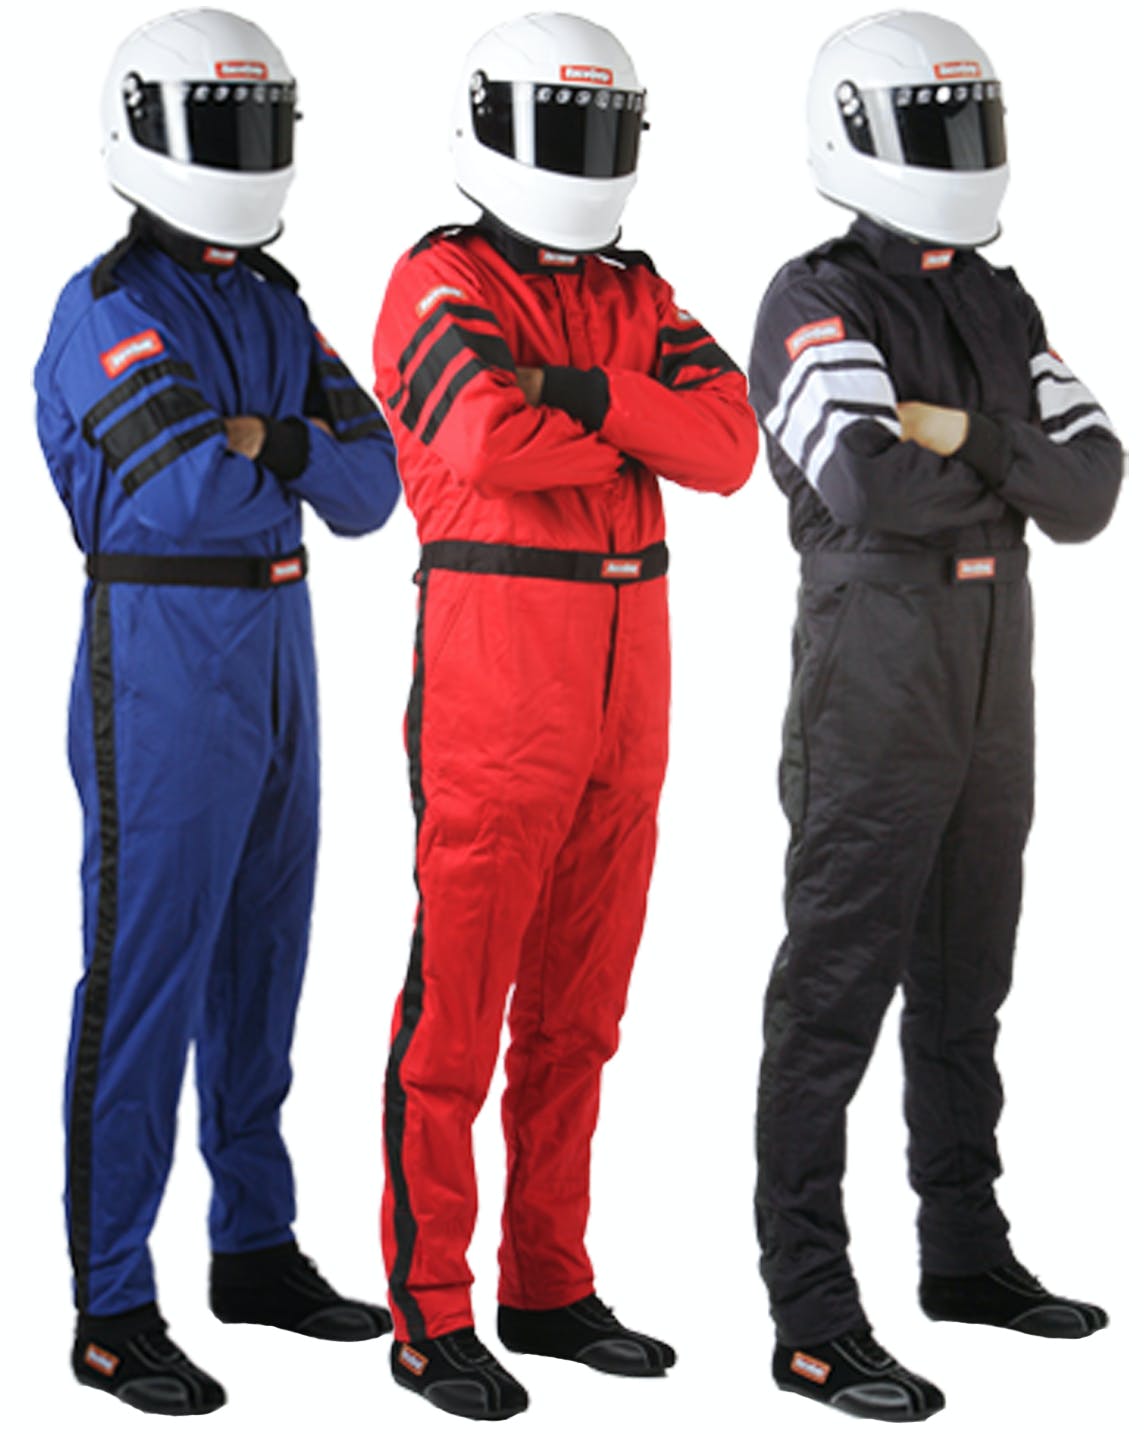 RaceQuip 120022 SFI-5 Pyrovatex One-Piece Multi-Layer Racing Fire Suit (Blue, Small)